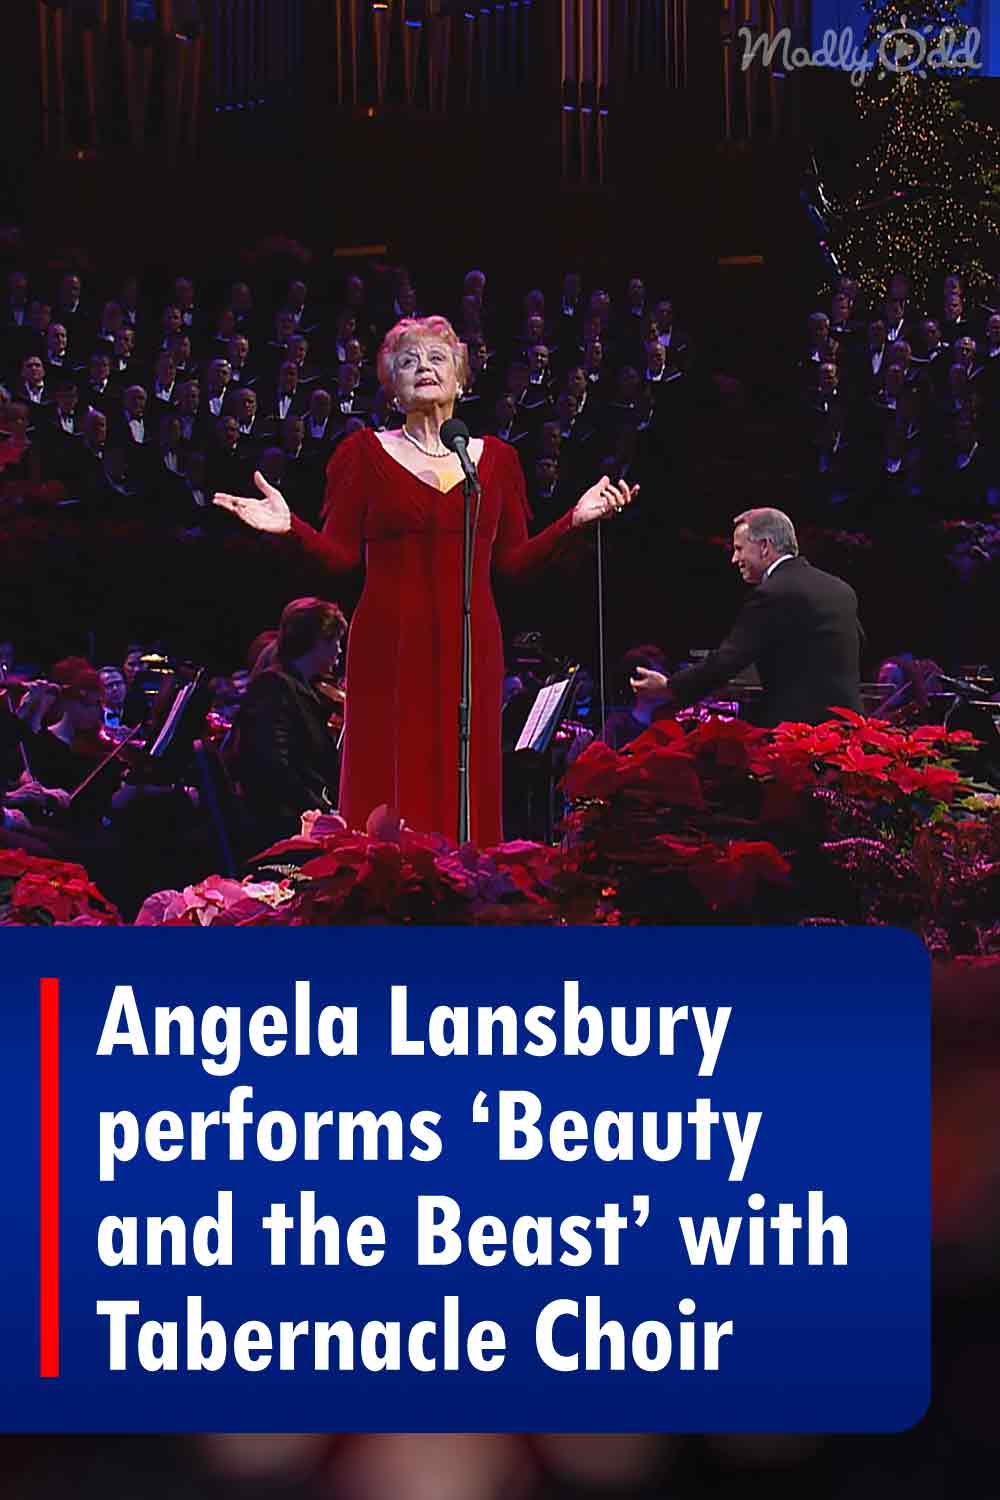 Angela Lansbury performs ‘Beauty and the Beast’ with Tabernacle Choir